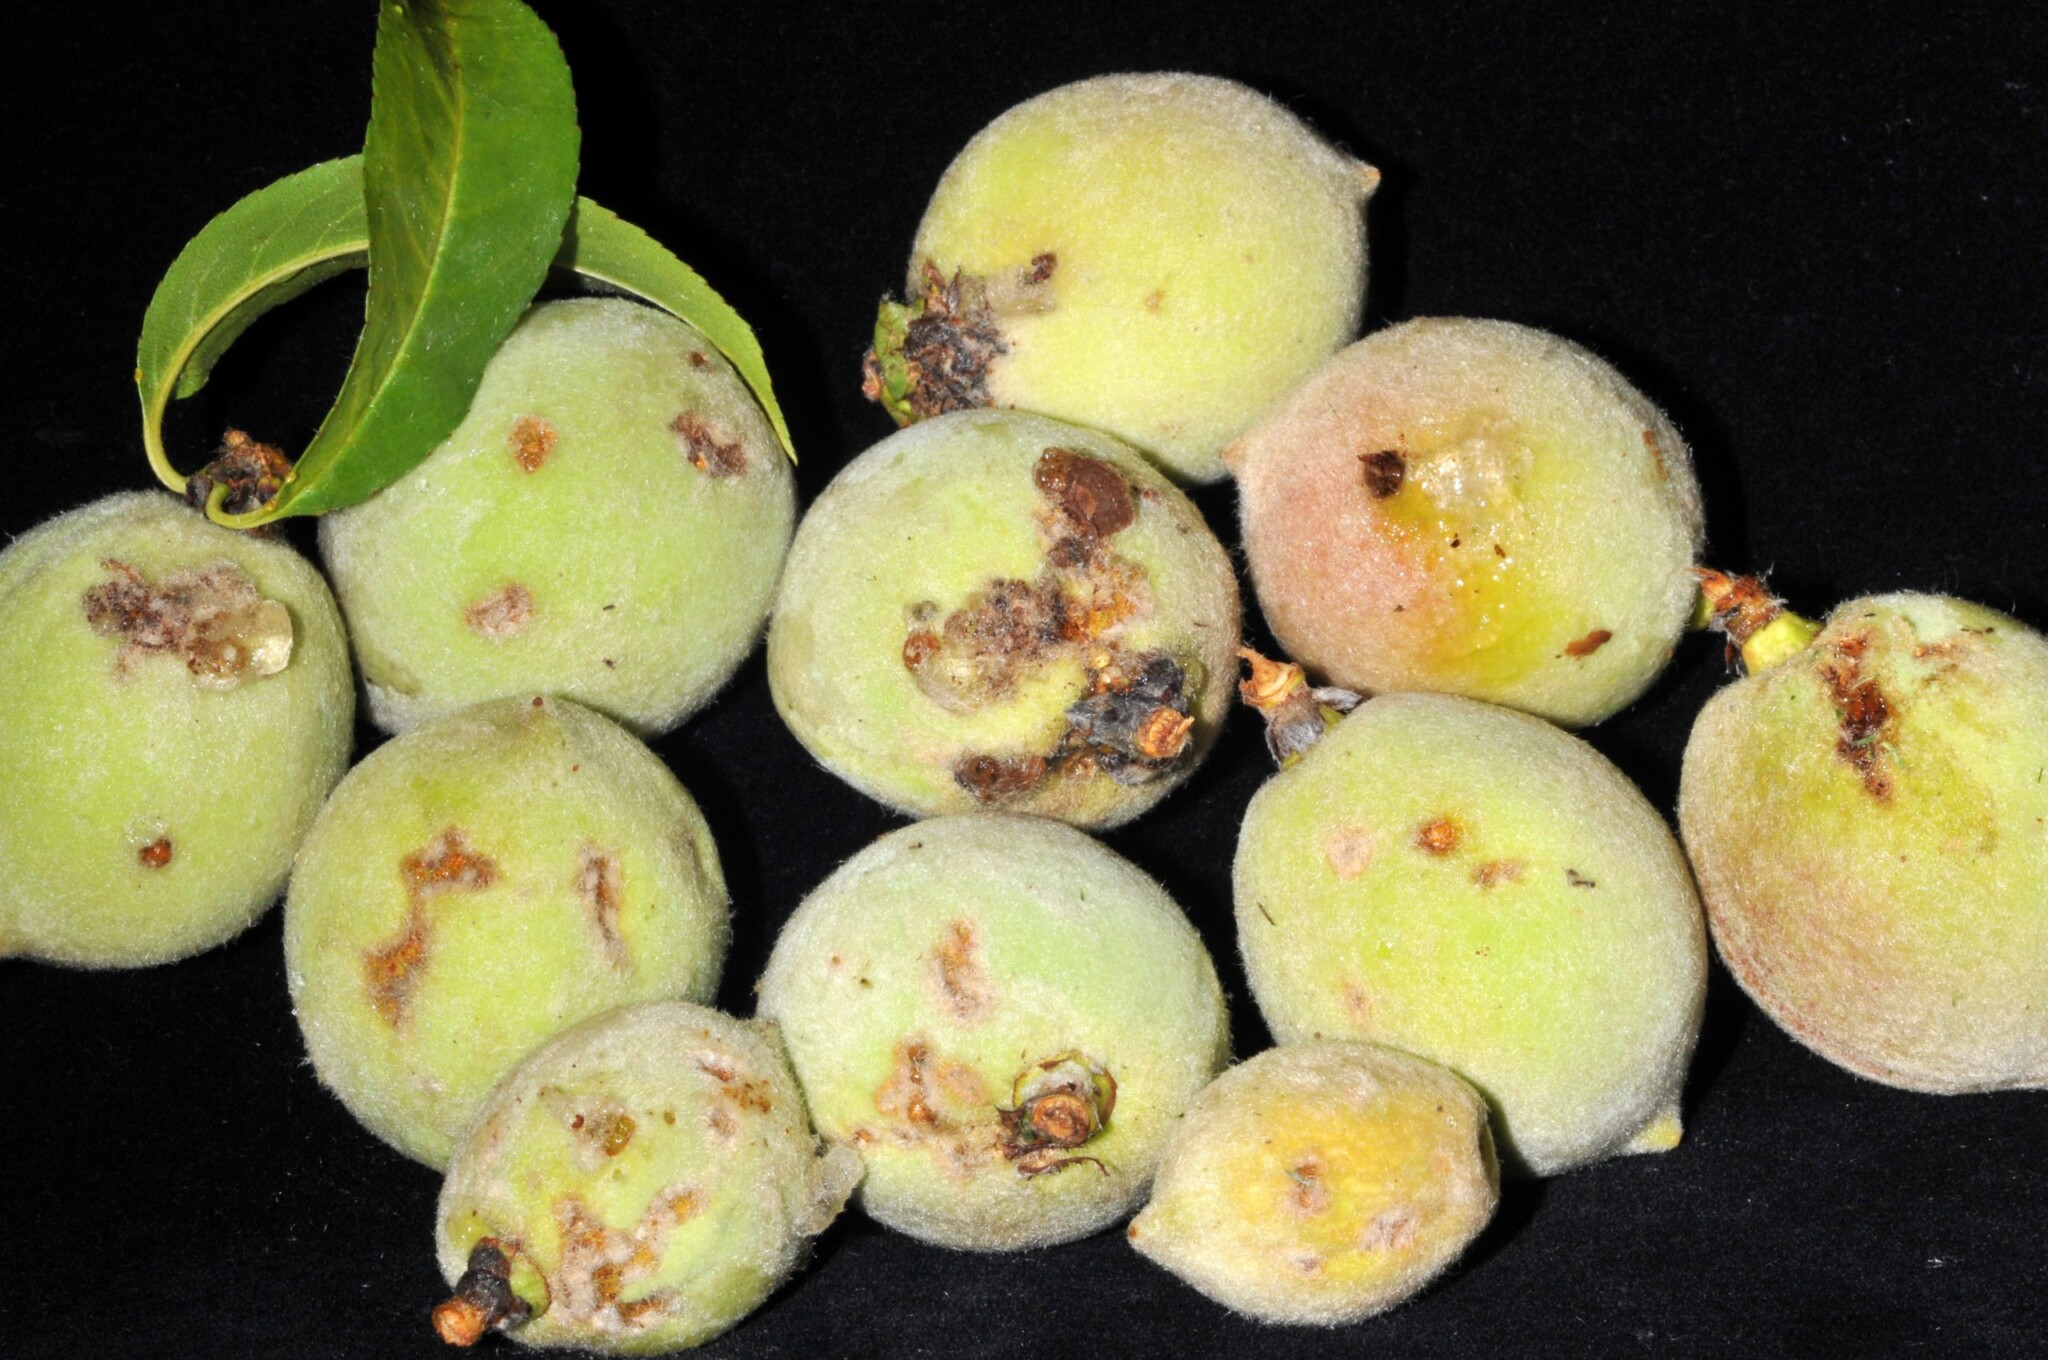 Diagnosing fruit insect pests using signs and symptoms | Purdue ...